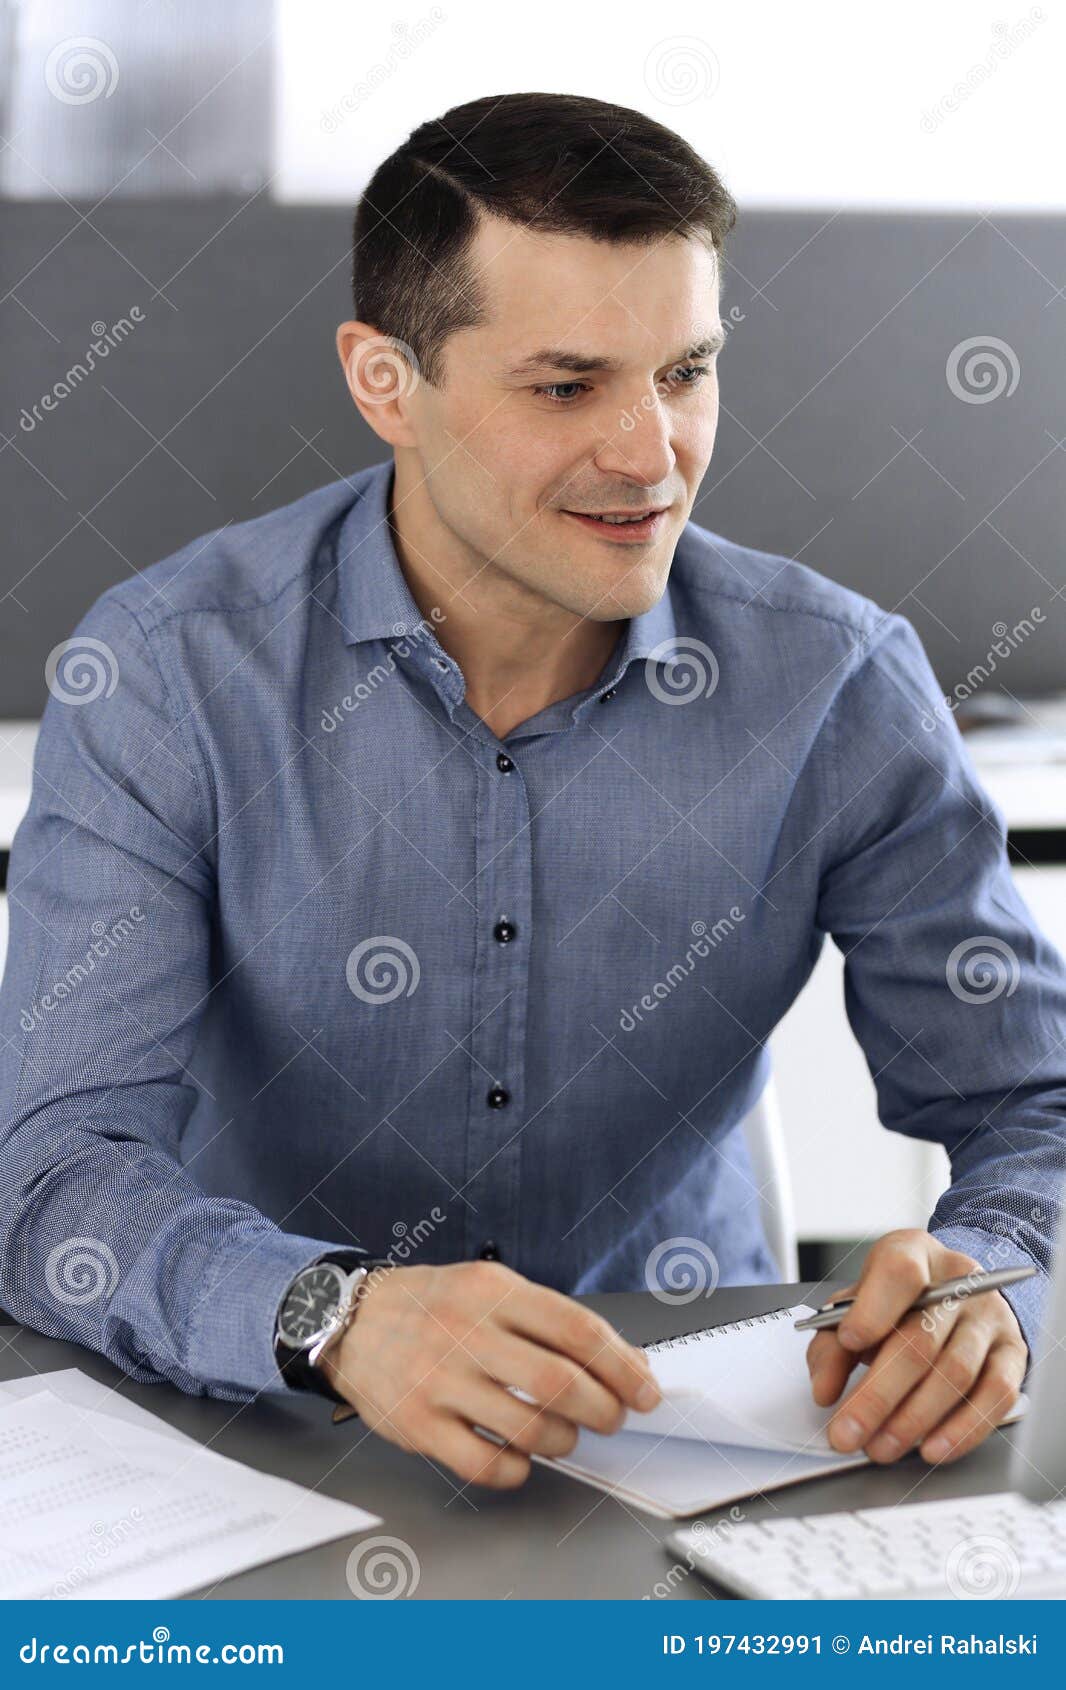 Businessman working with computer in modern office. Headshot of male entrepreneur or company director at workplace. Business concept.